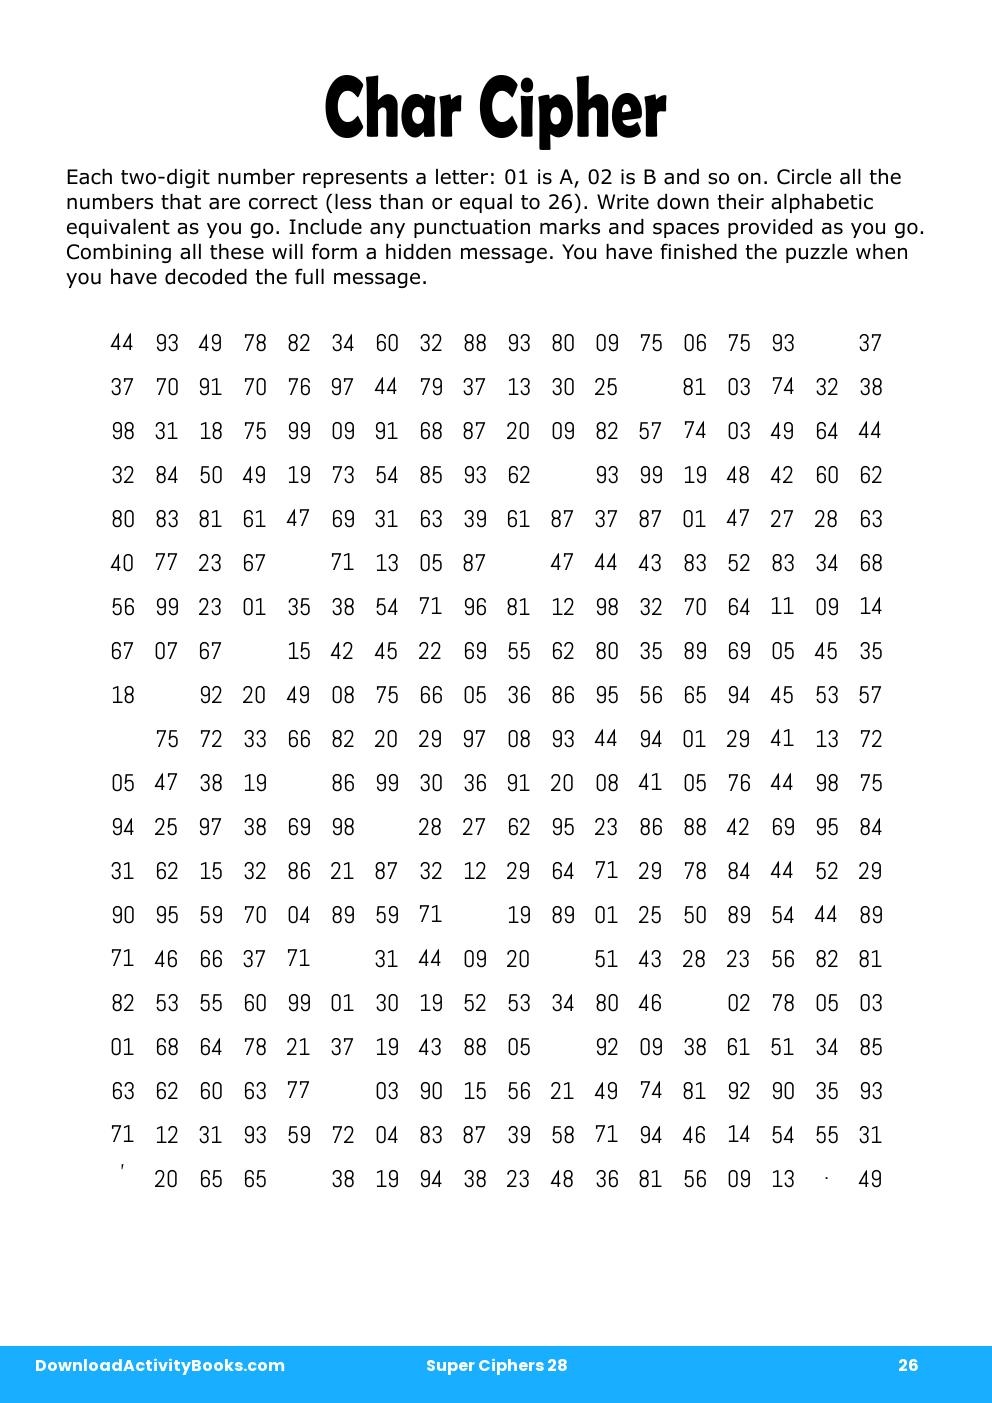 Char Cipher in Super Ciphers 28